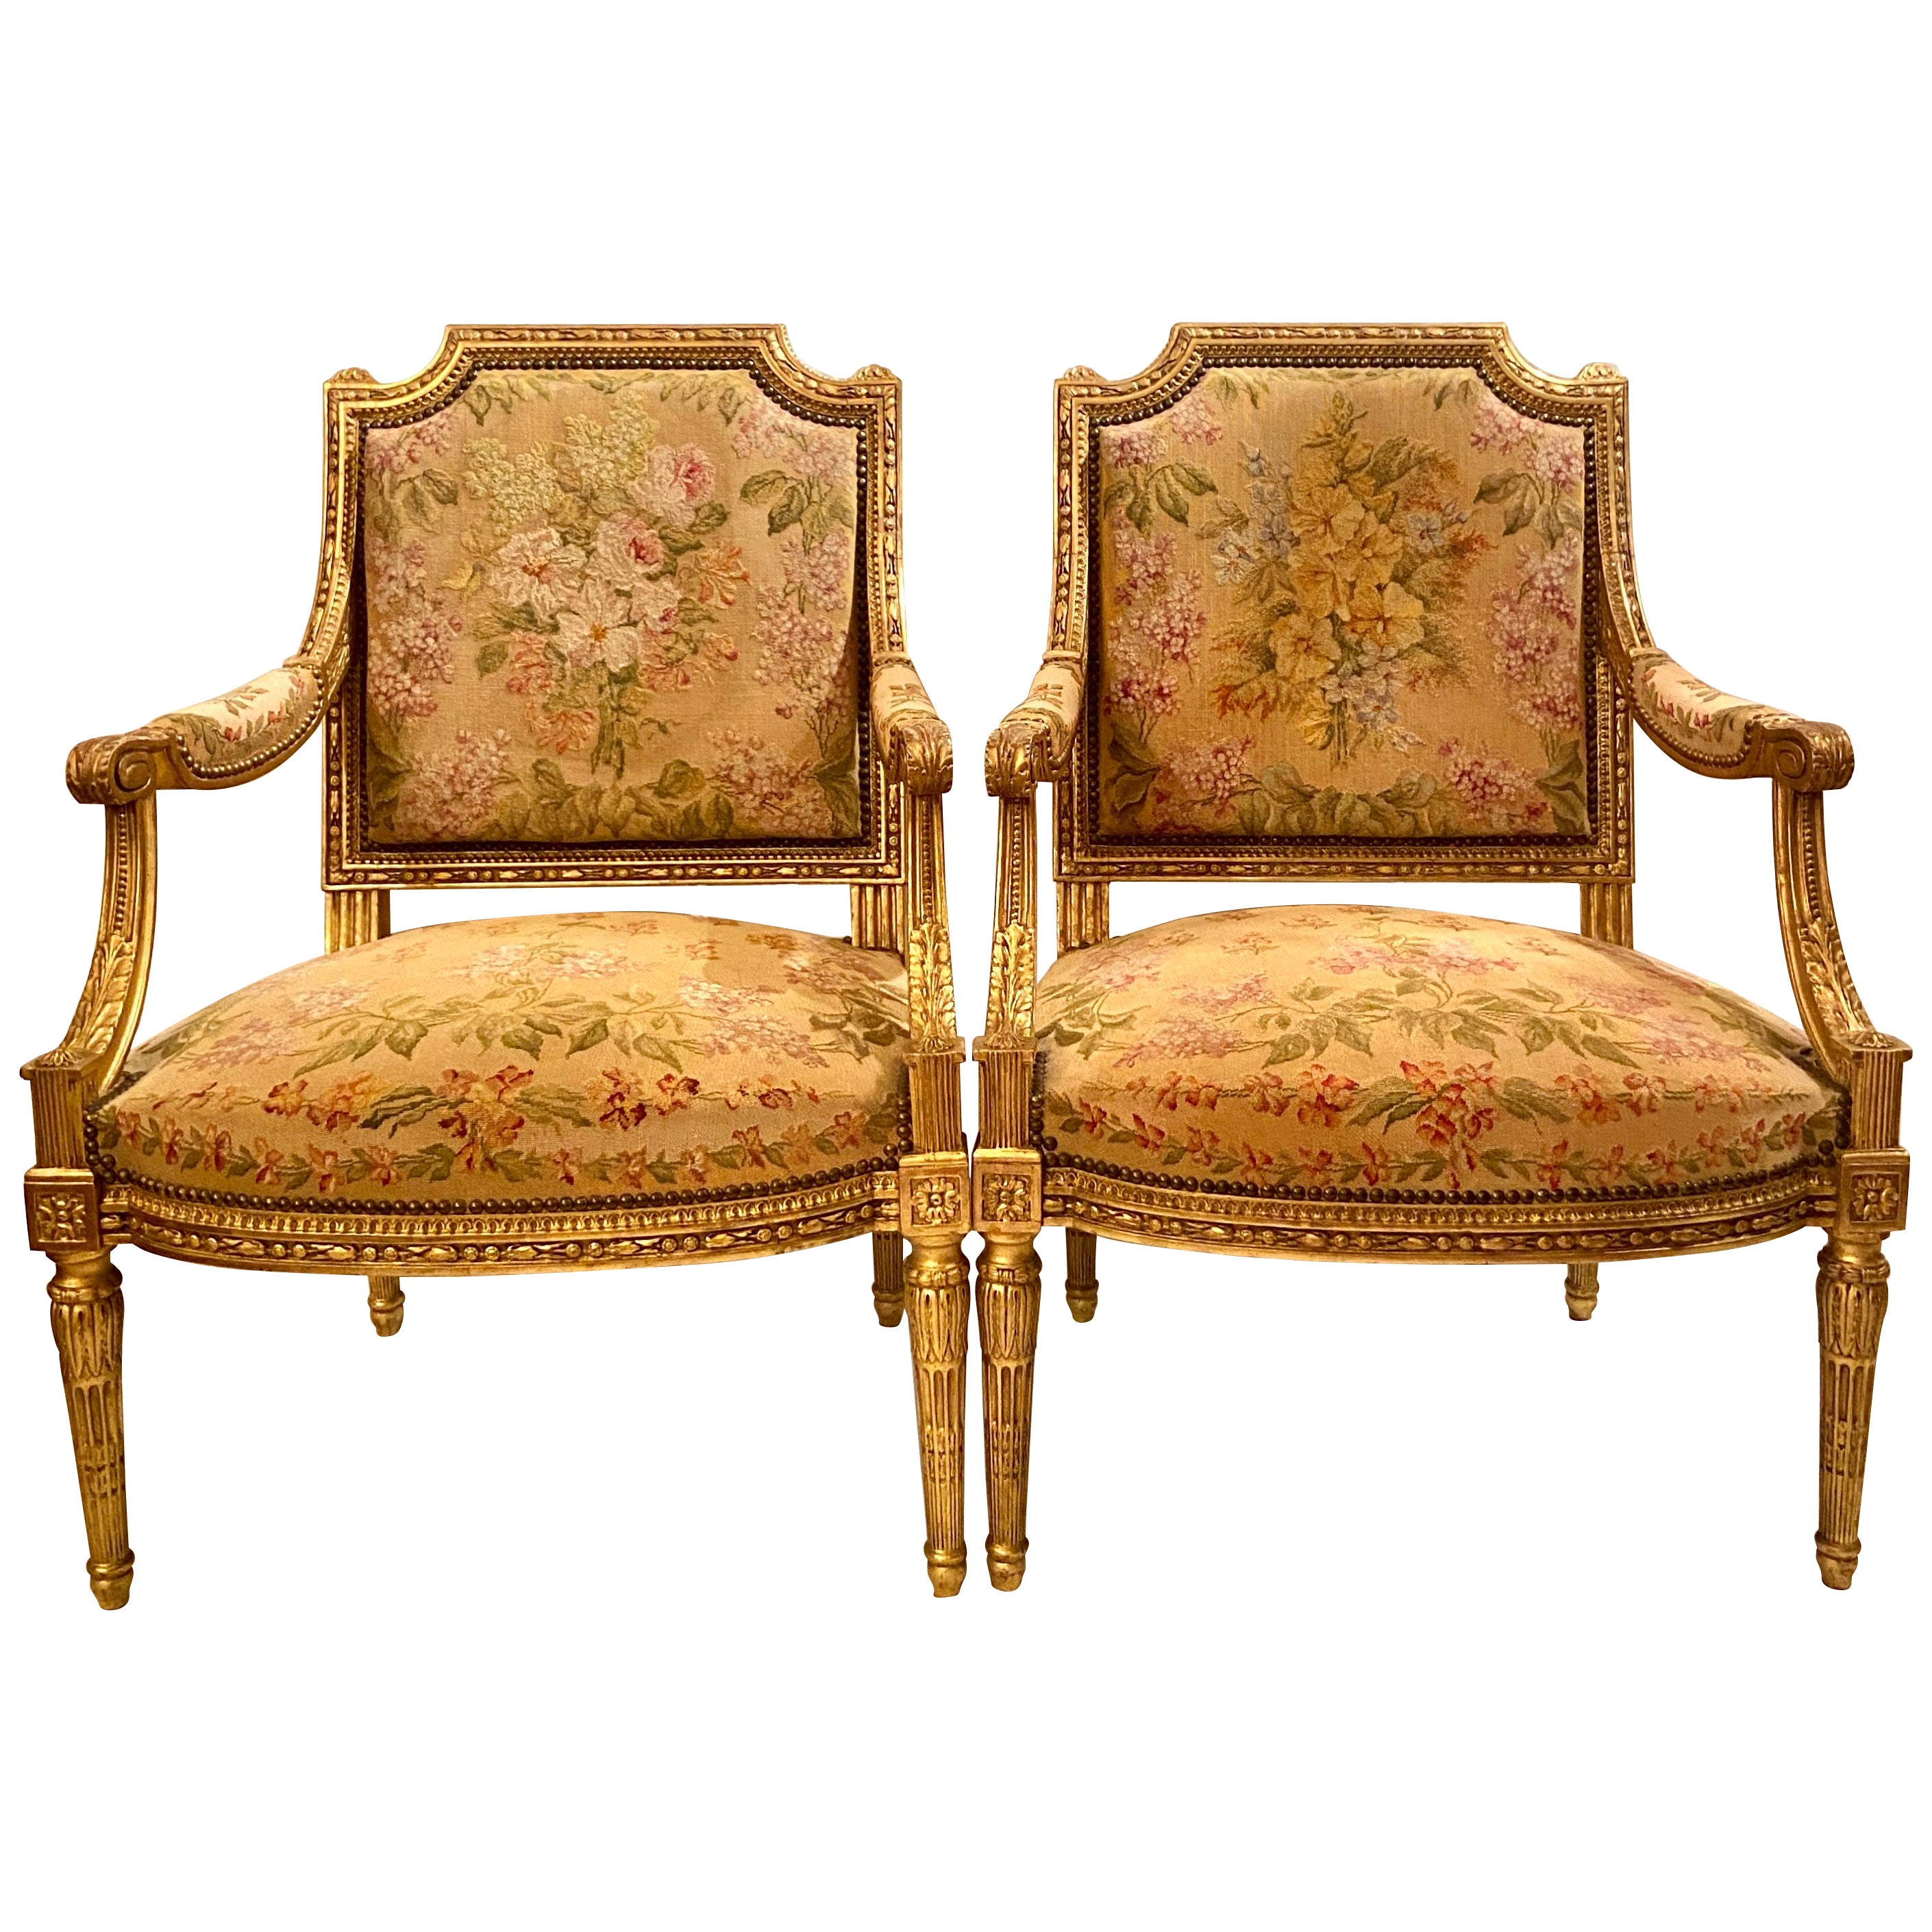 Pair Antique French Carved Wood with Gold Leaf Needlepoint Armchairs, Circa 1880 For Sale